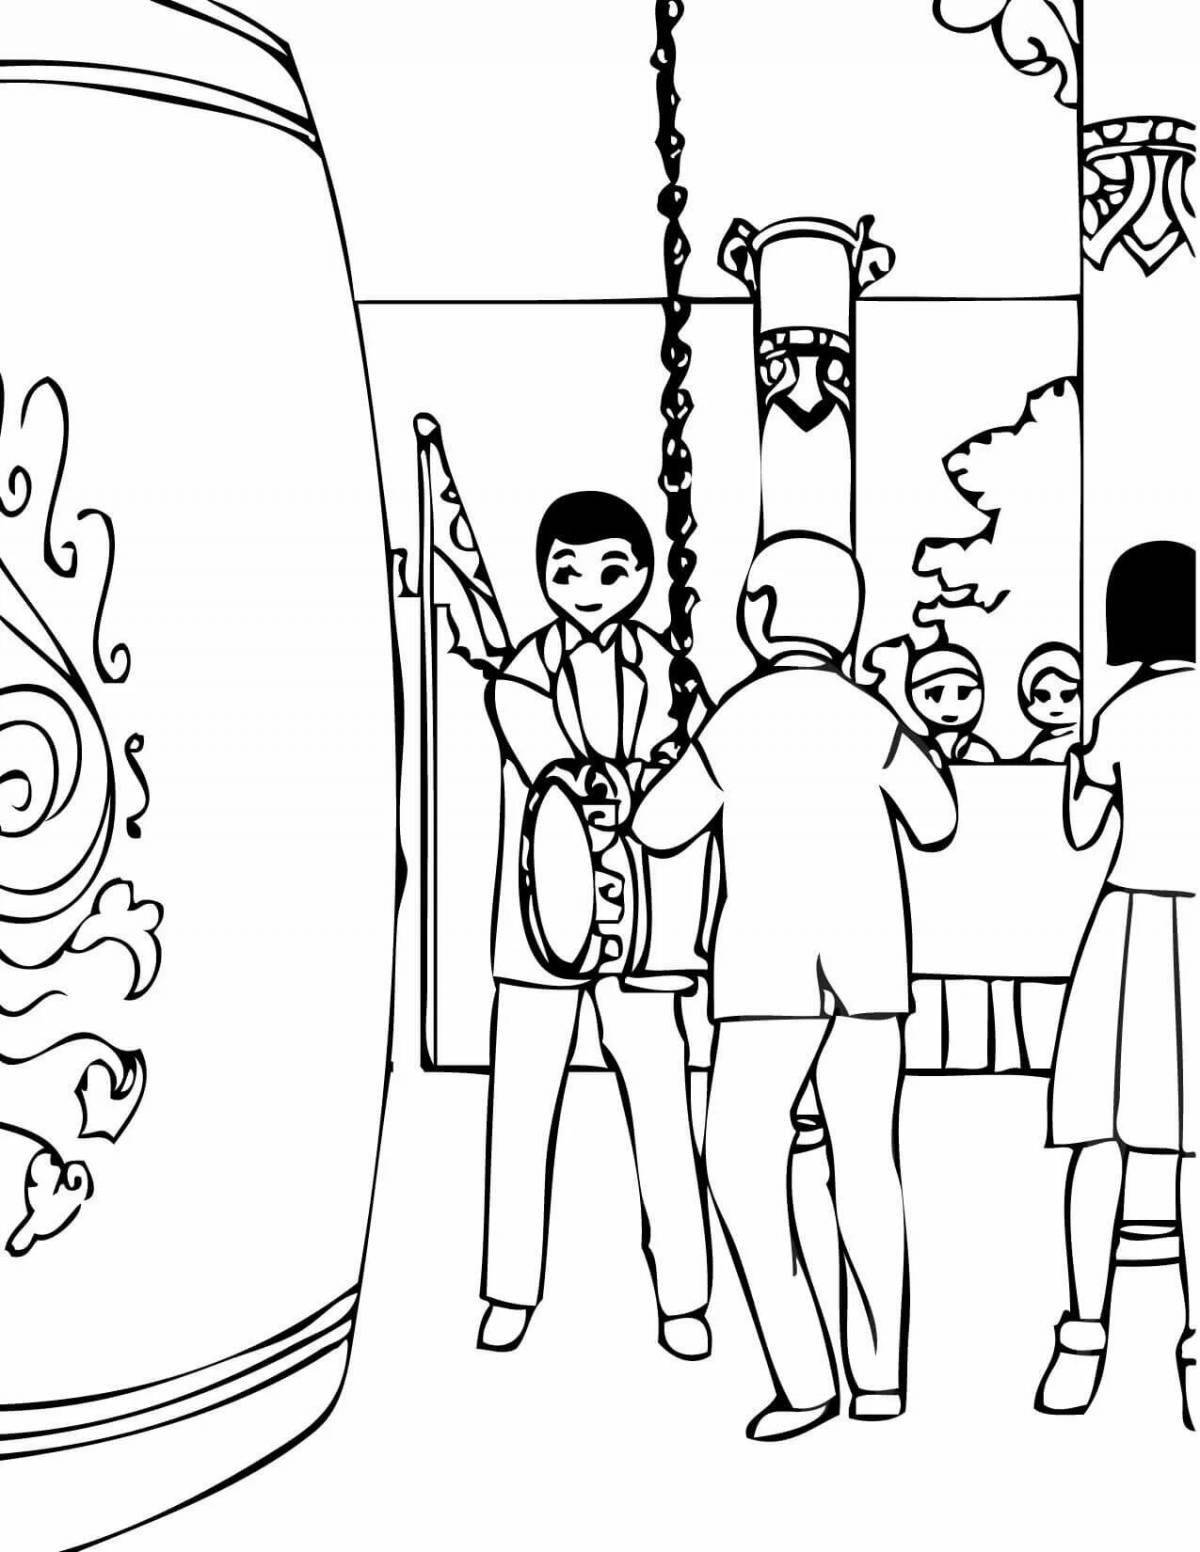 Colorful korea coloring page